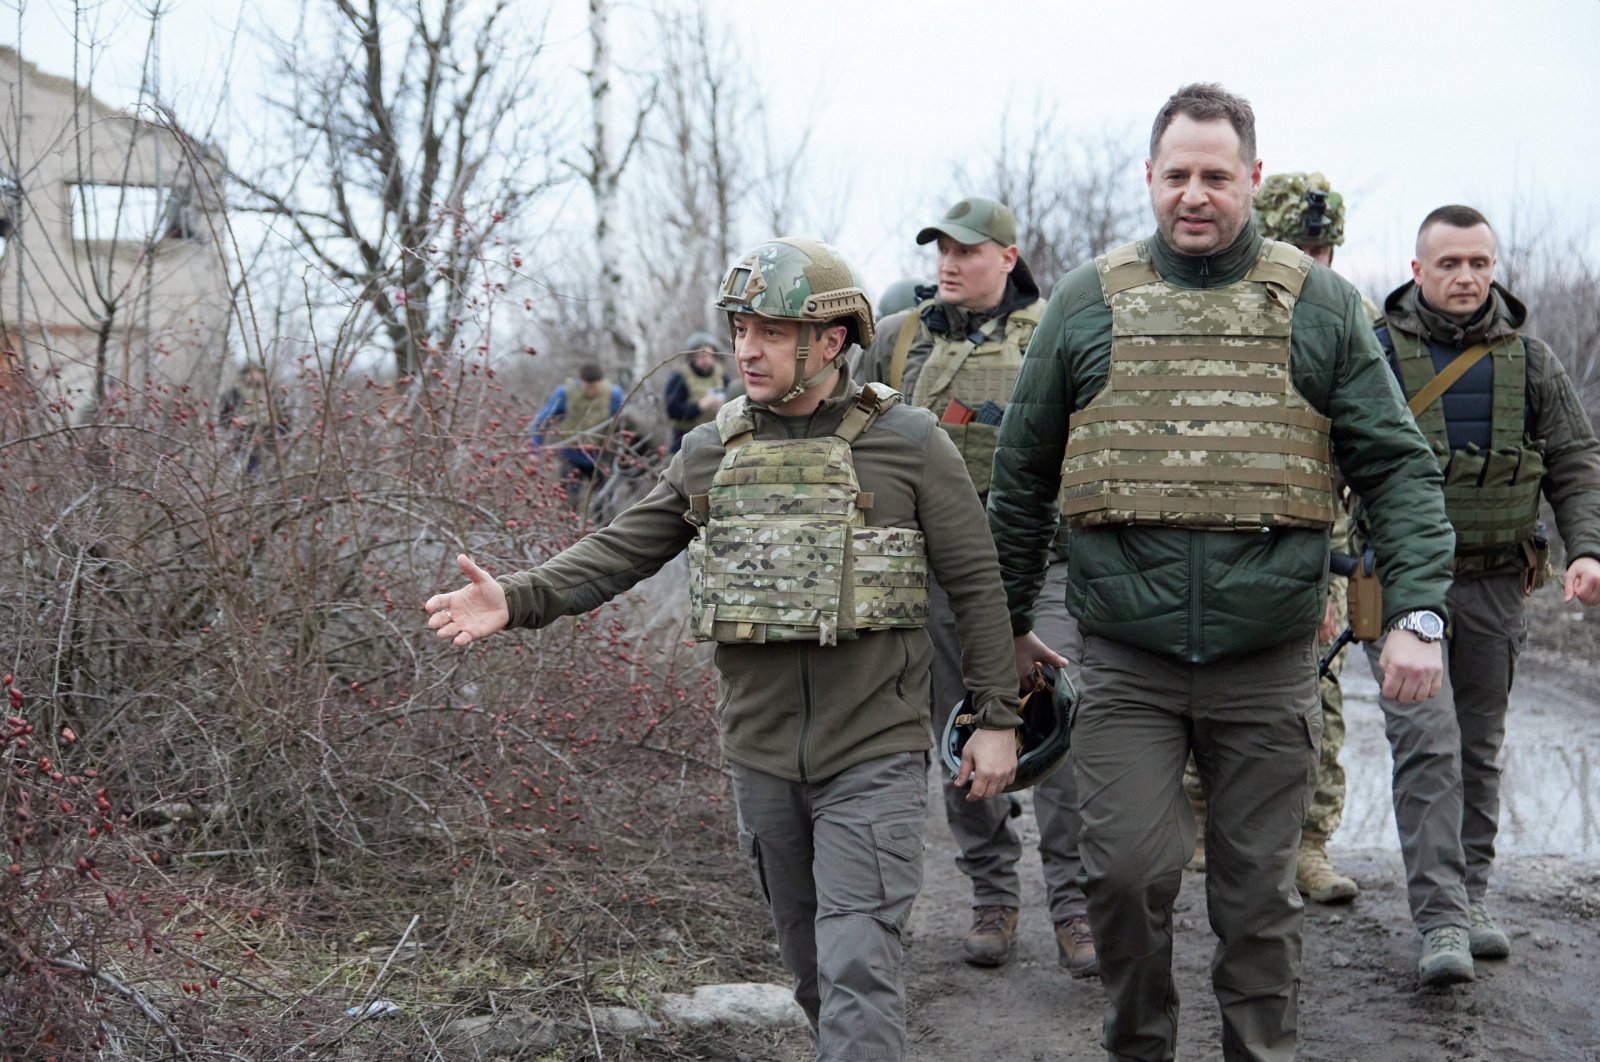 Ukrainian President Volodymyr Zelenskyy visits combat positions of the country&#039;s armed forces near the line of separation from Russian-backed rebels in the Donetsk region, Ukraine, Feb. 17, 2022. (Reuters Photo)